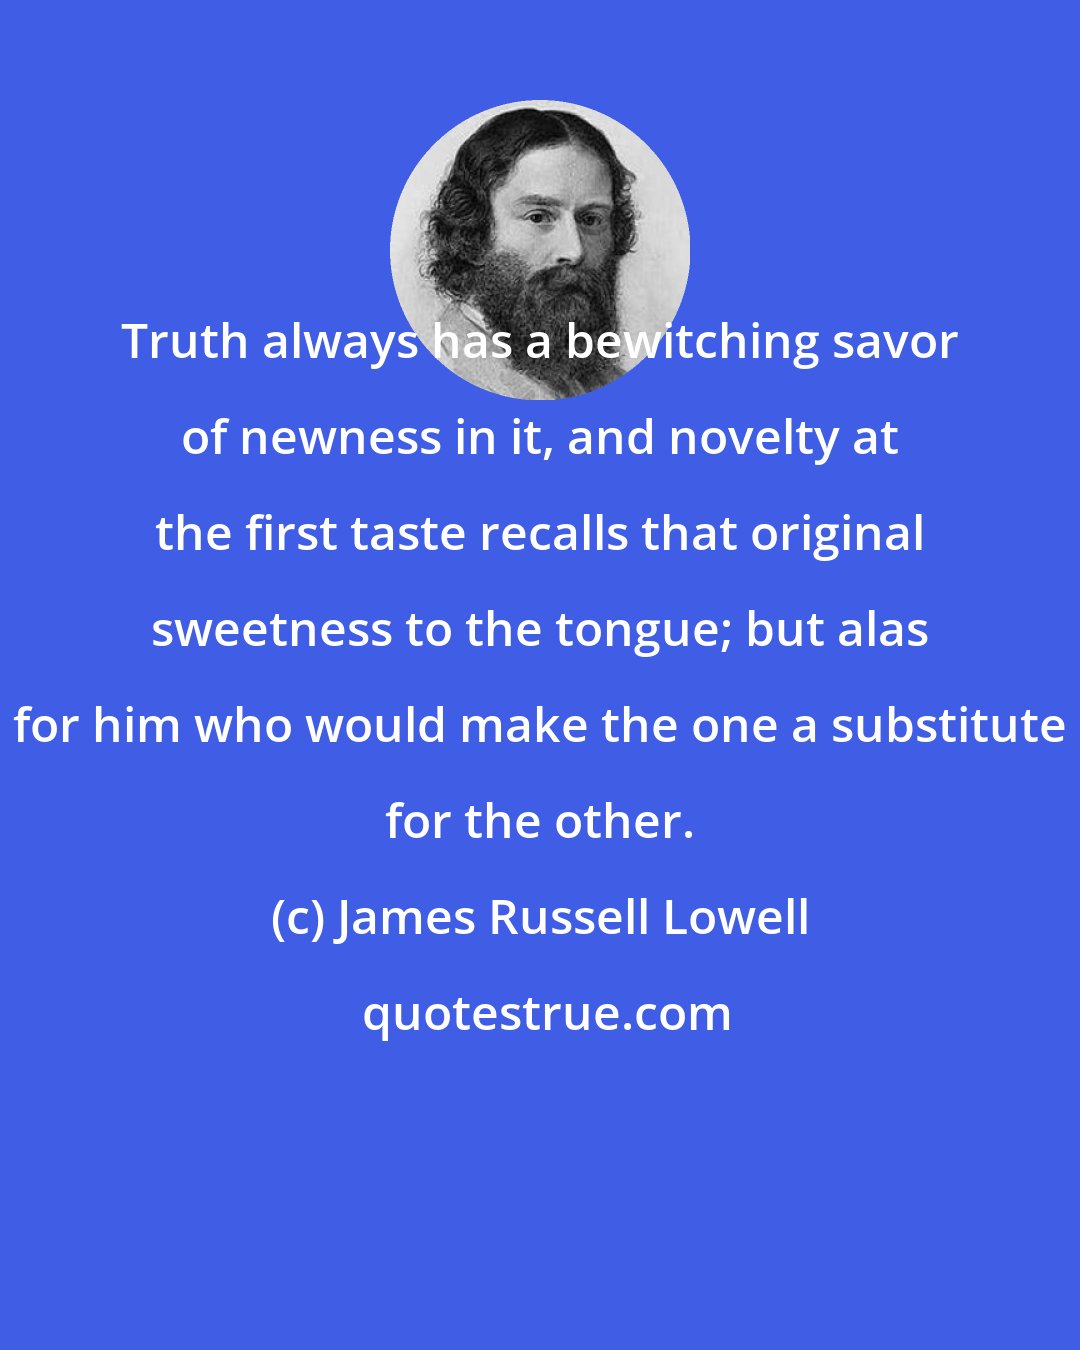 James Russell Lowell: Truth always has a bewitching savor of newness in it, and novelty at the first taste recalls that original sweetness to the tongue; but alas for him who would make the one a substitute for the other.